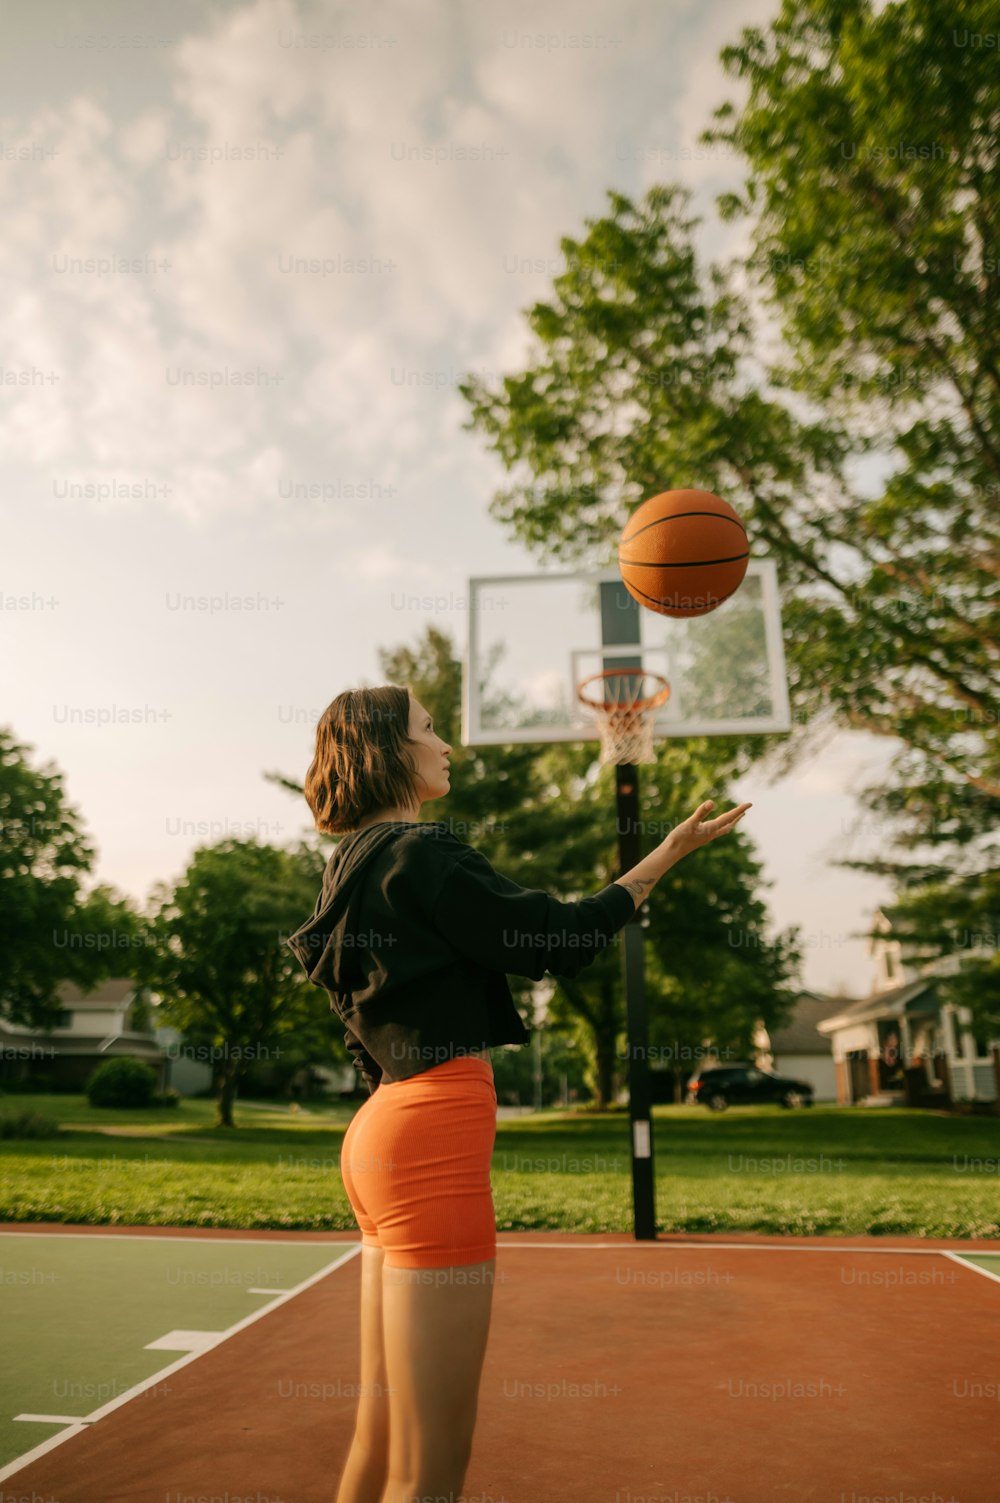 a woman is playing basketball on a court